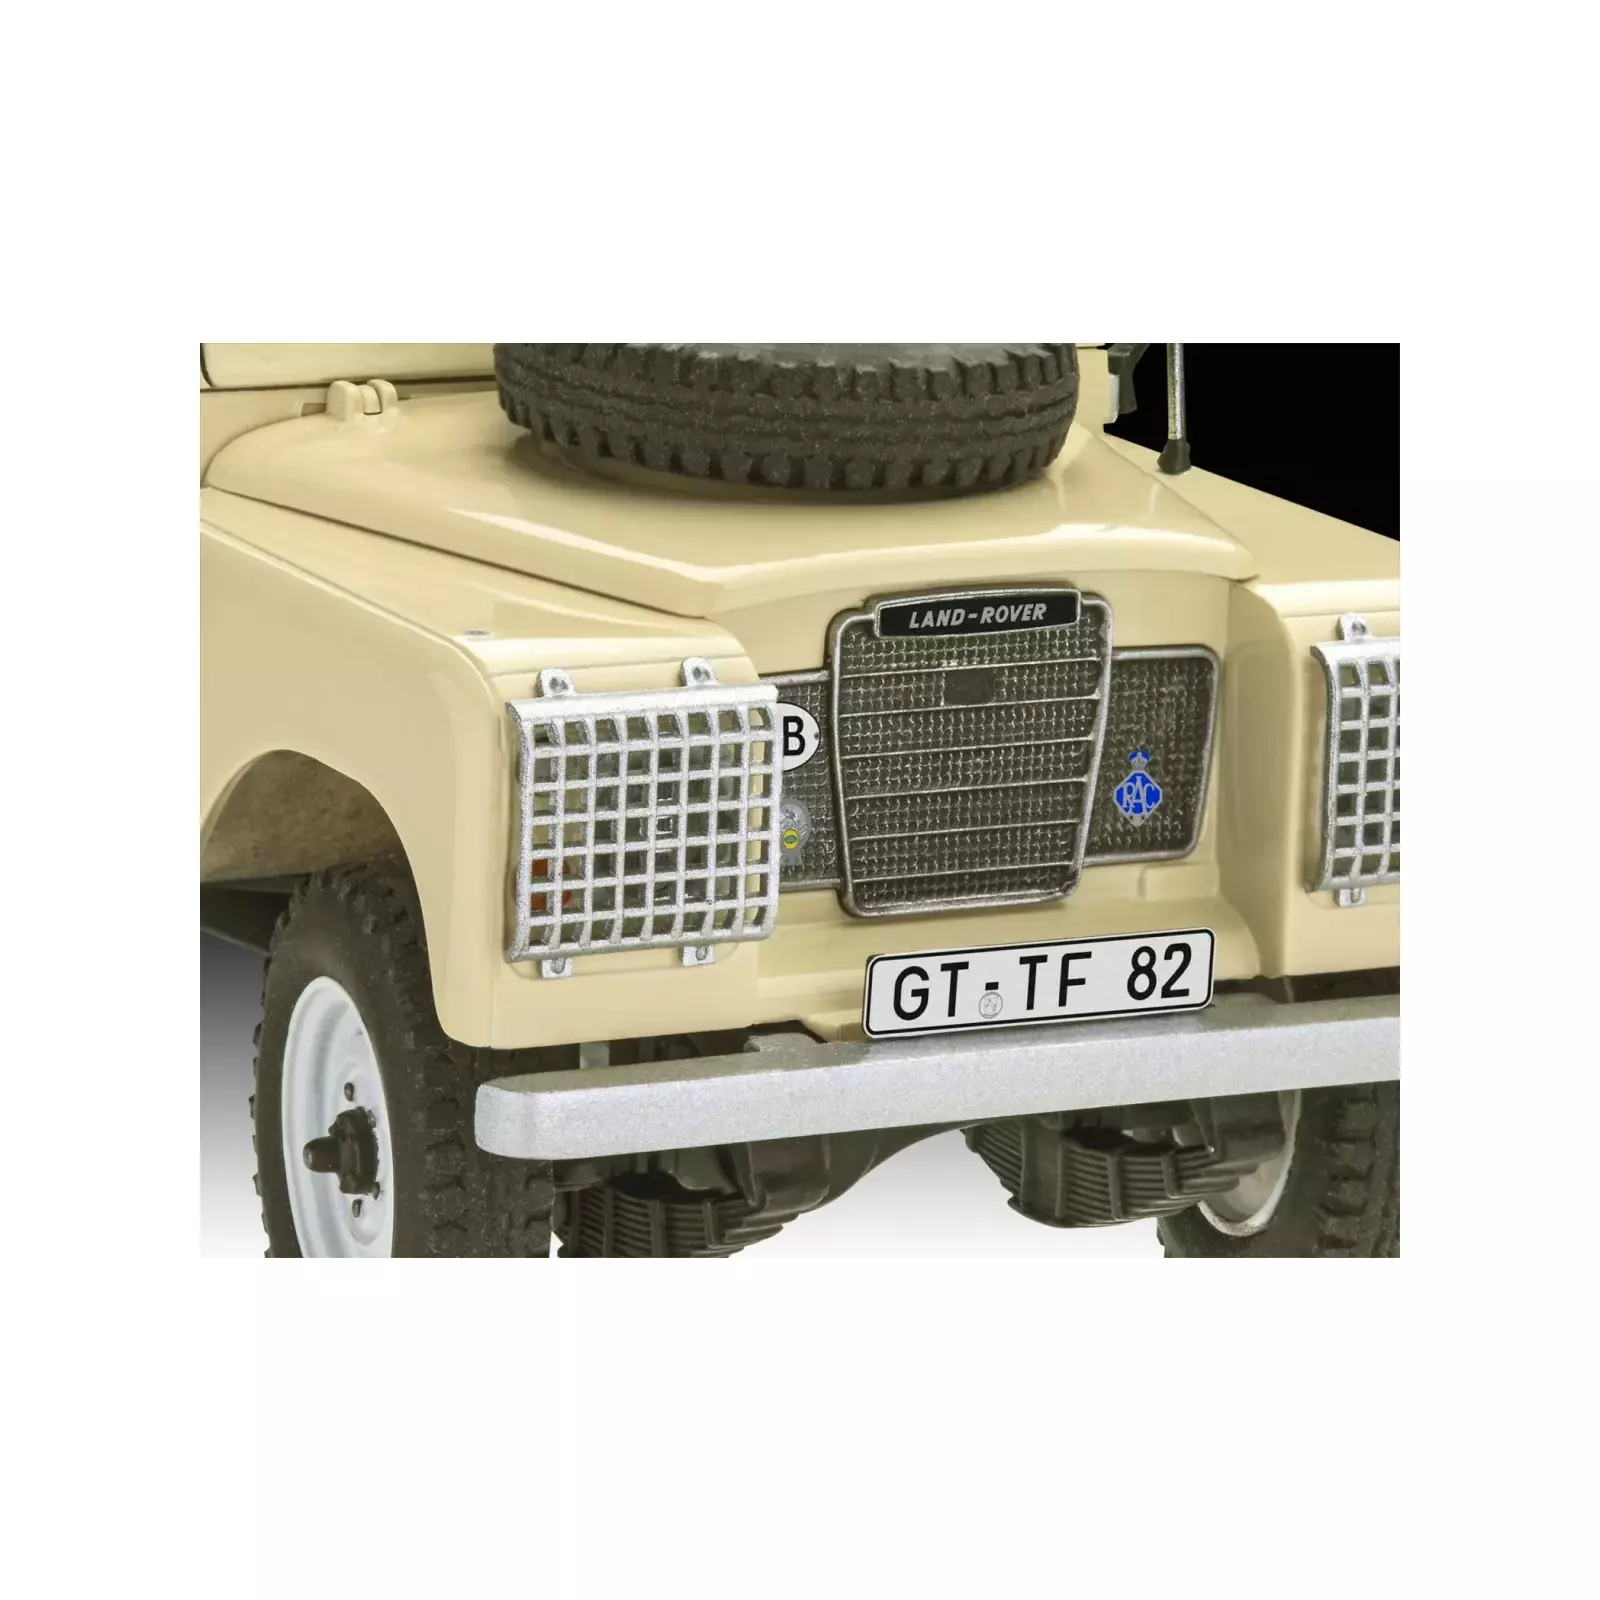 Plastic model Land Rover series 07056, Toy construction sets